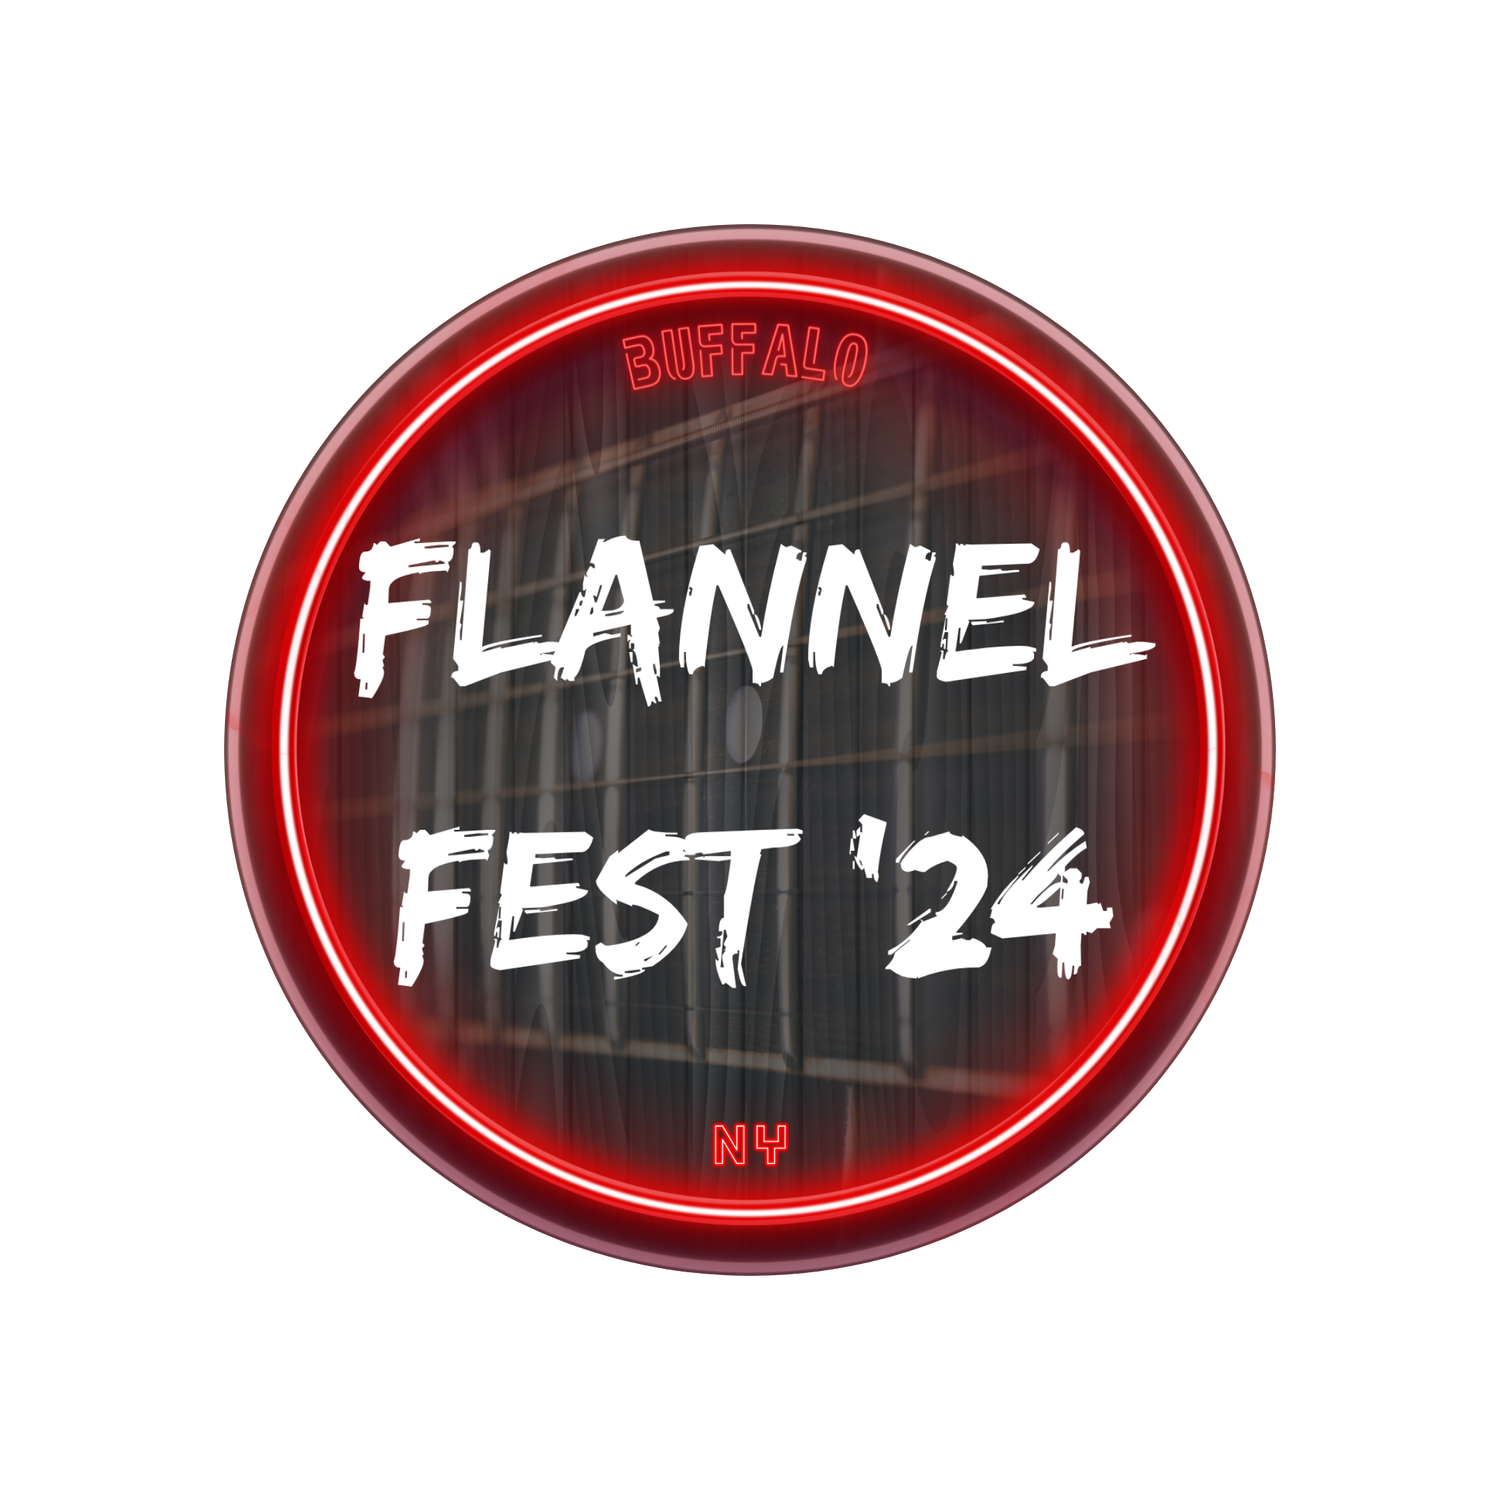 Flannel Fest 